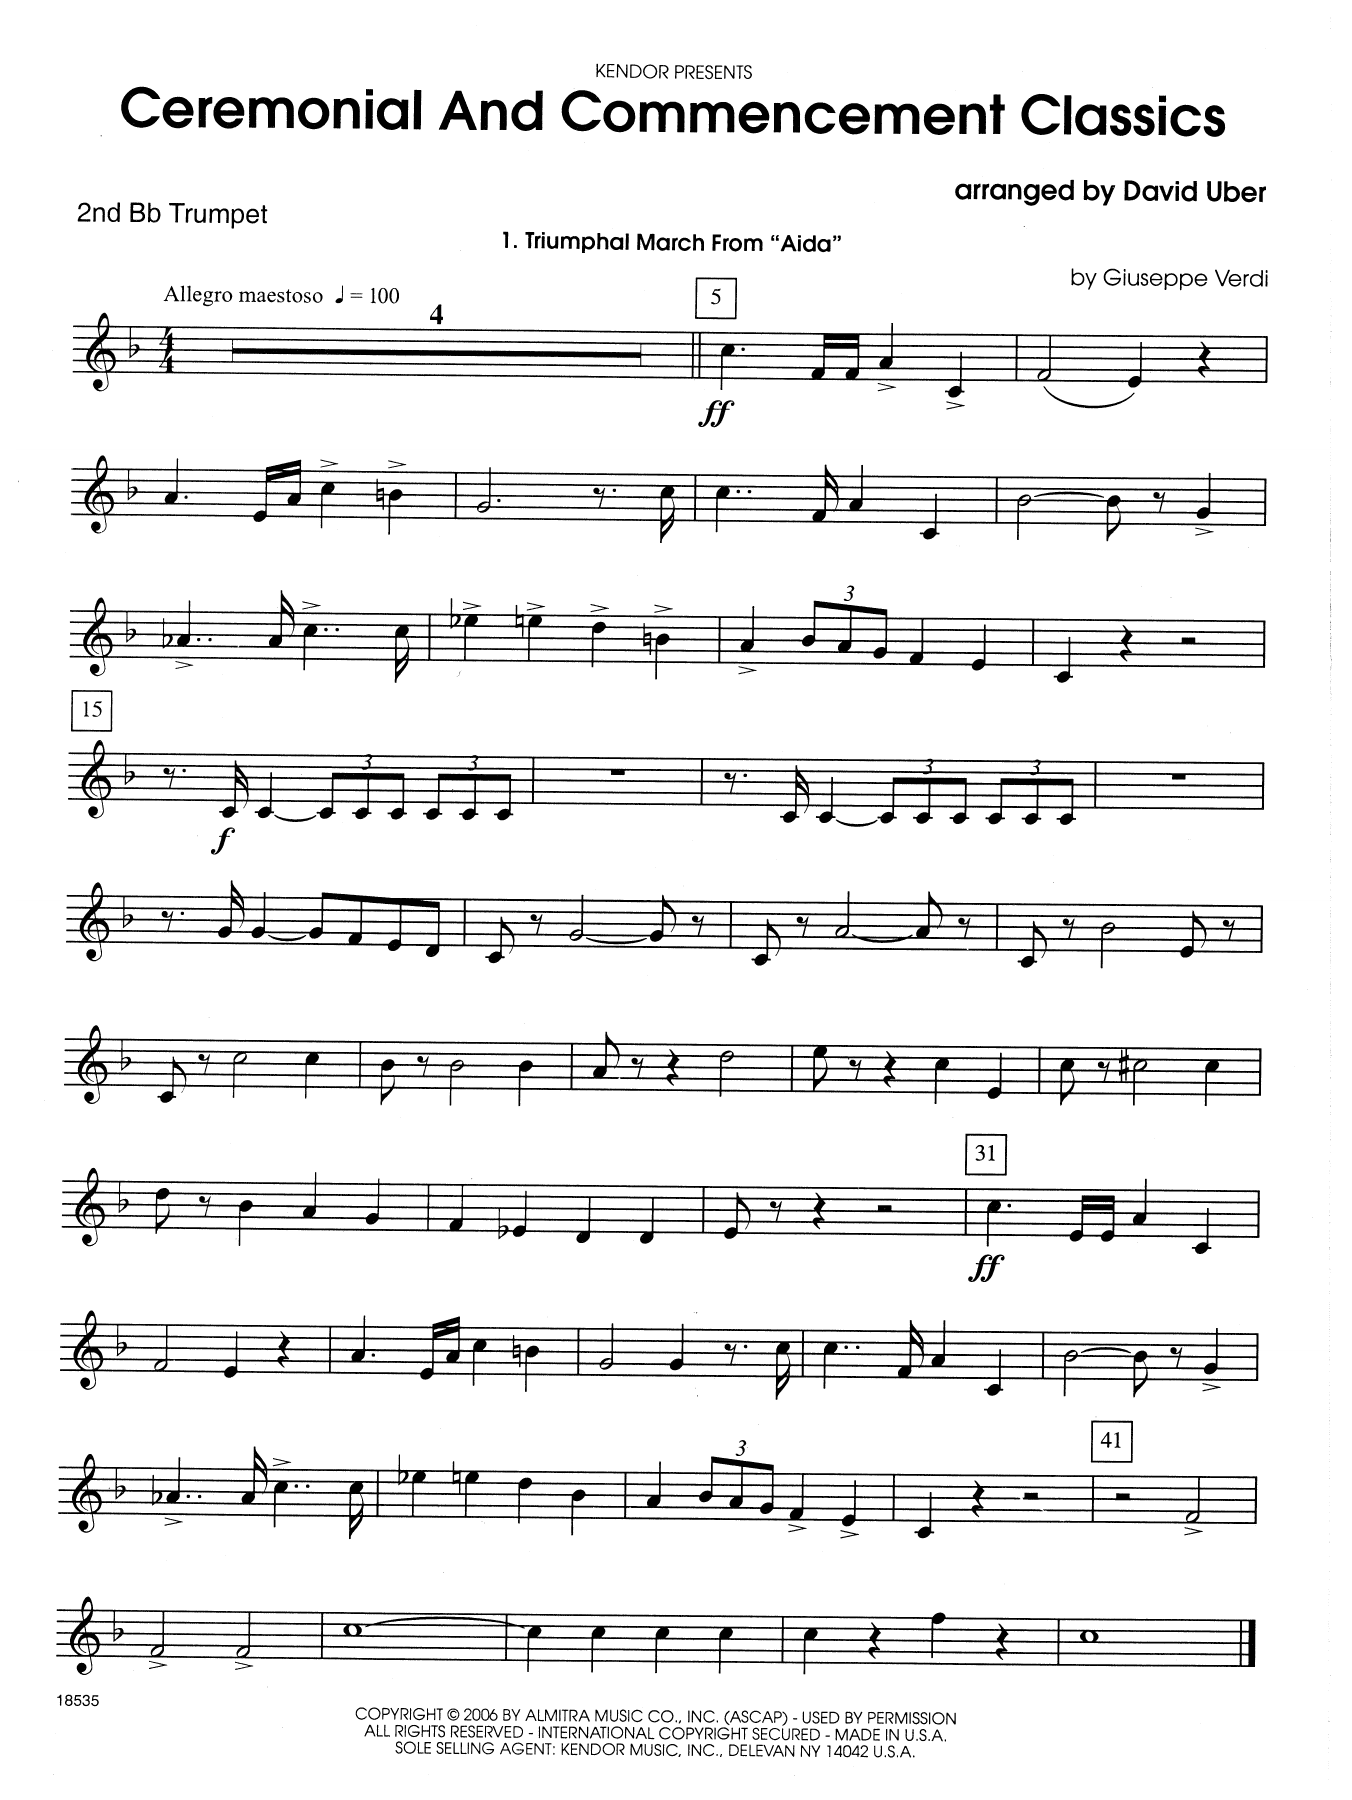 David Uber Ceremonial And Commencement Classics - 2nd Bb Trumpet sheet music notes and chords. Download Printable PDF.